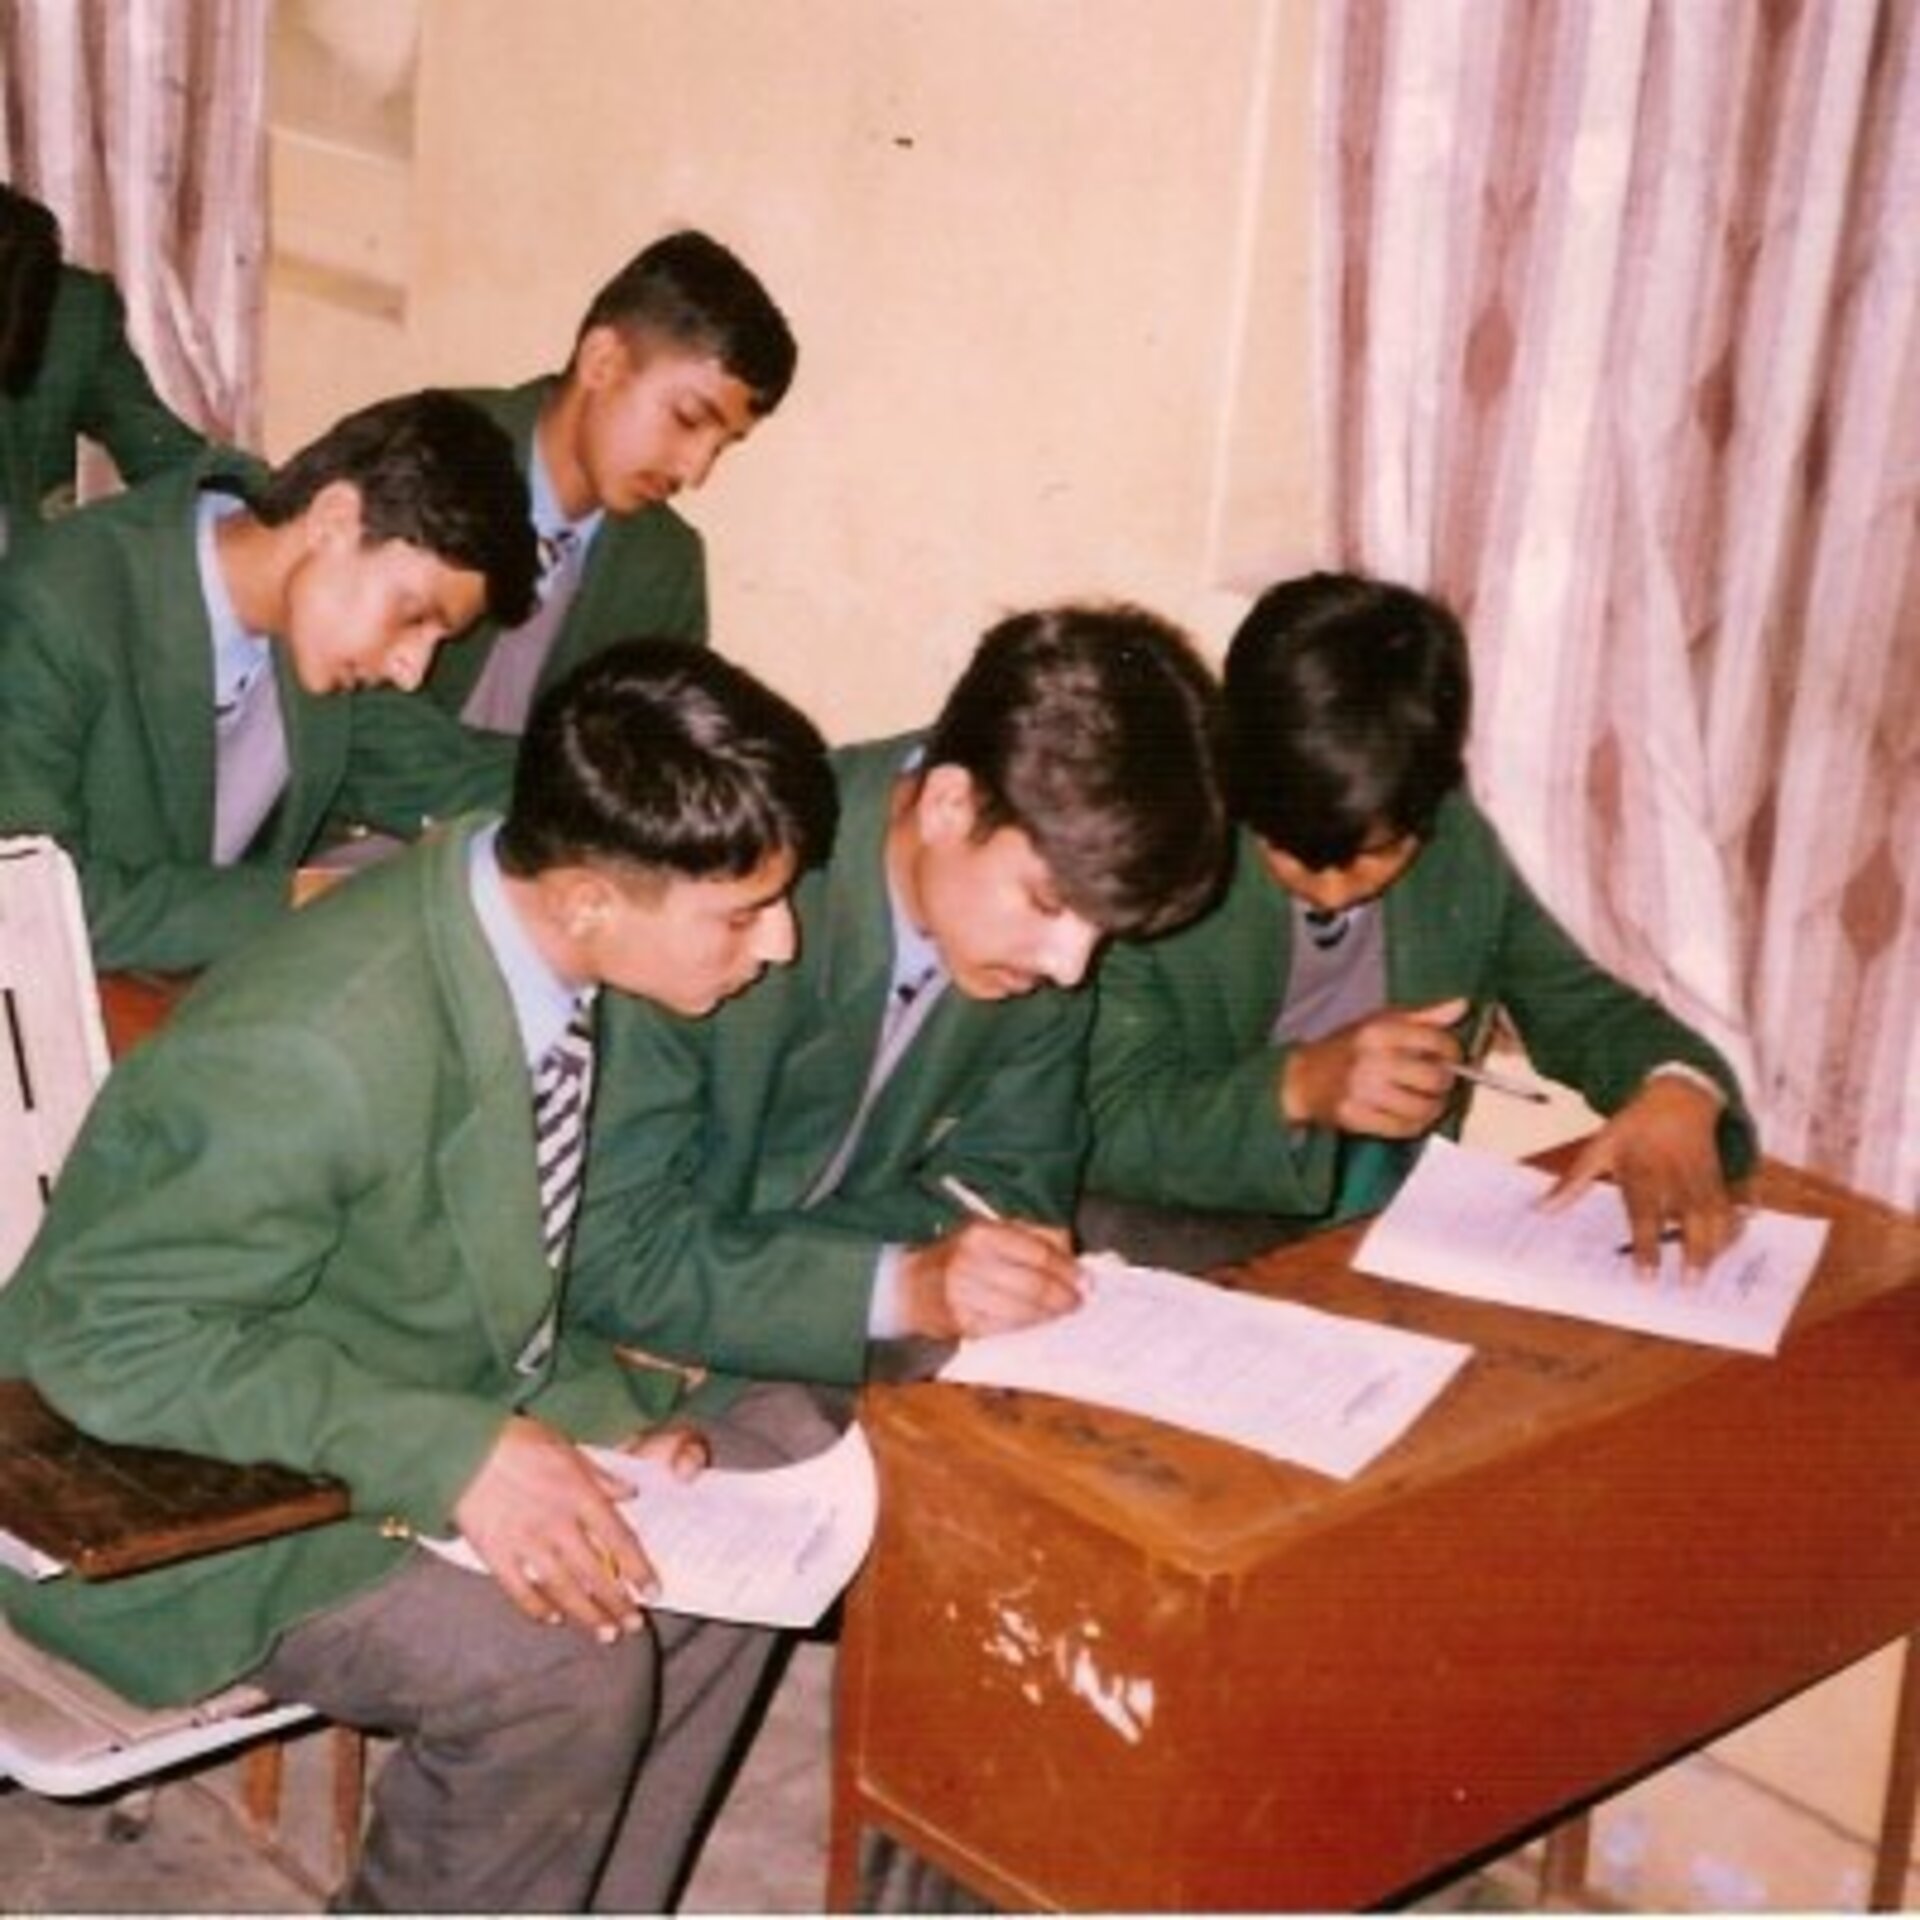 The students write their answer on a worksheet